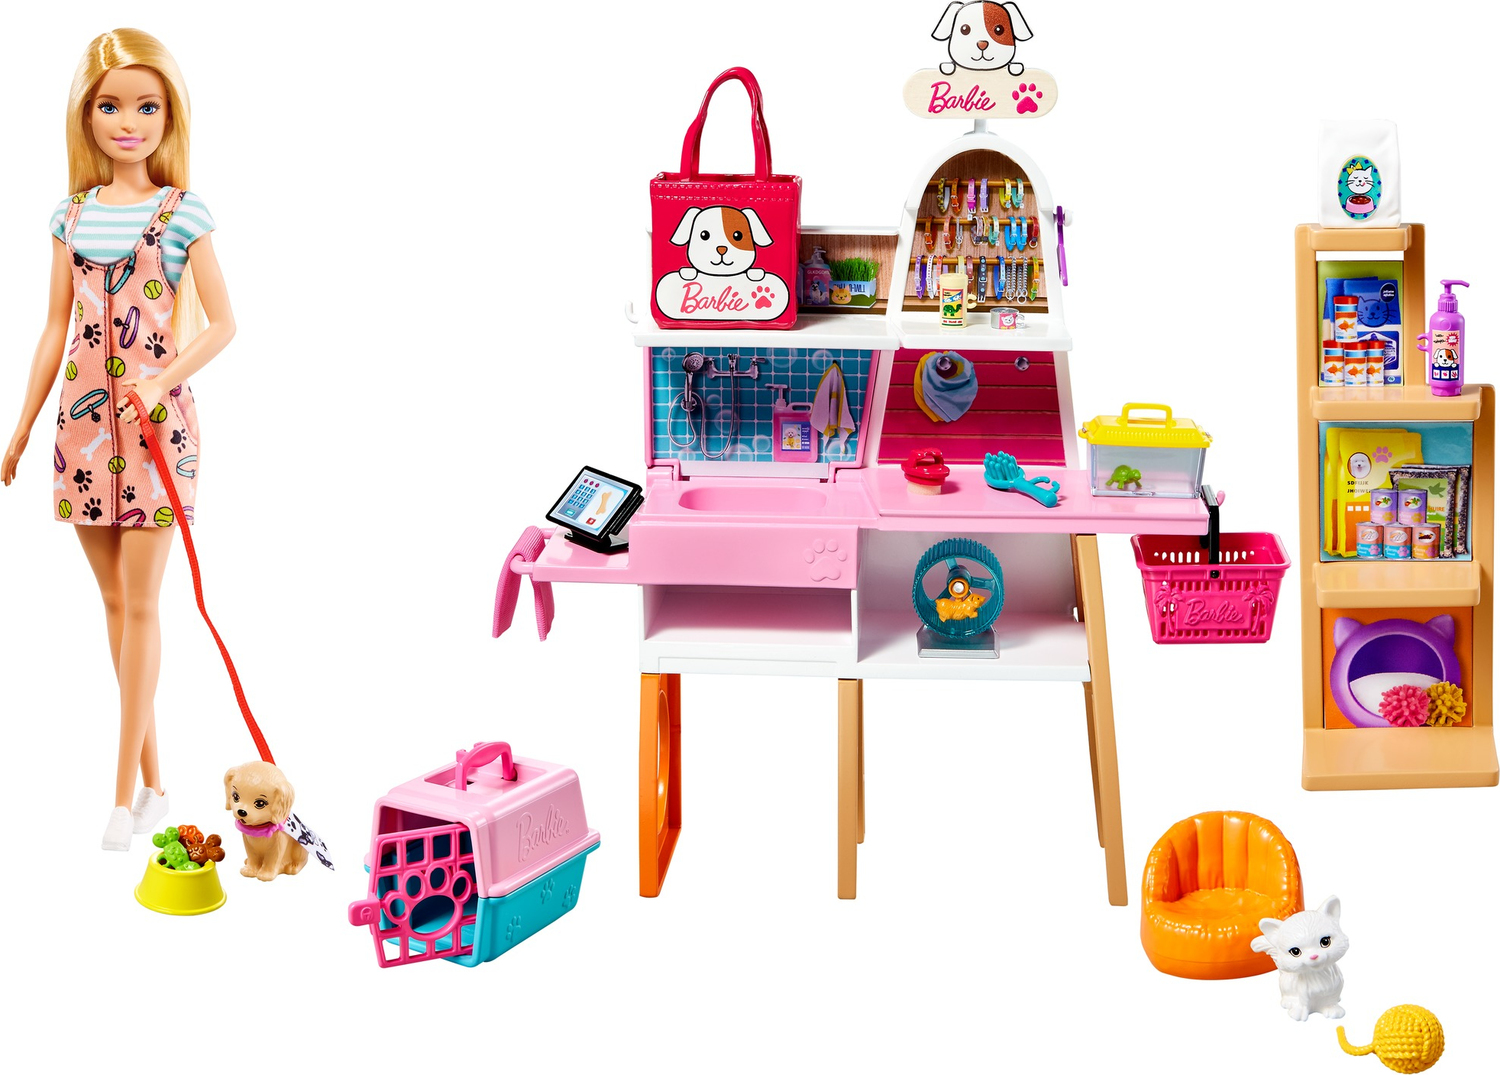 Barbie Doll (11.5-in Blonde) And Pet Boutique Playset - The Toy